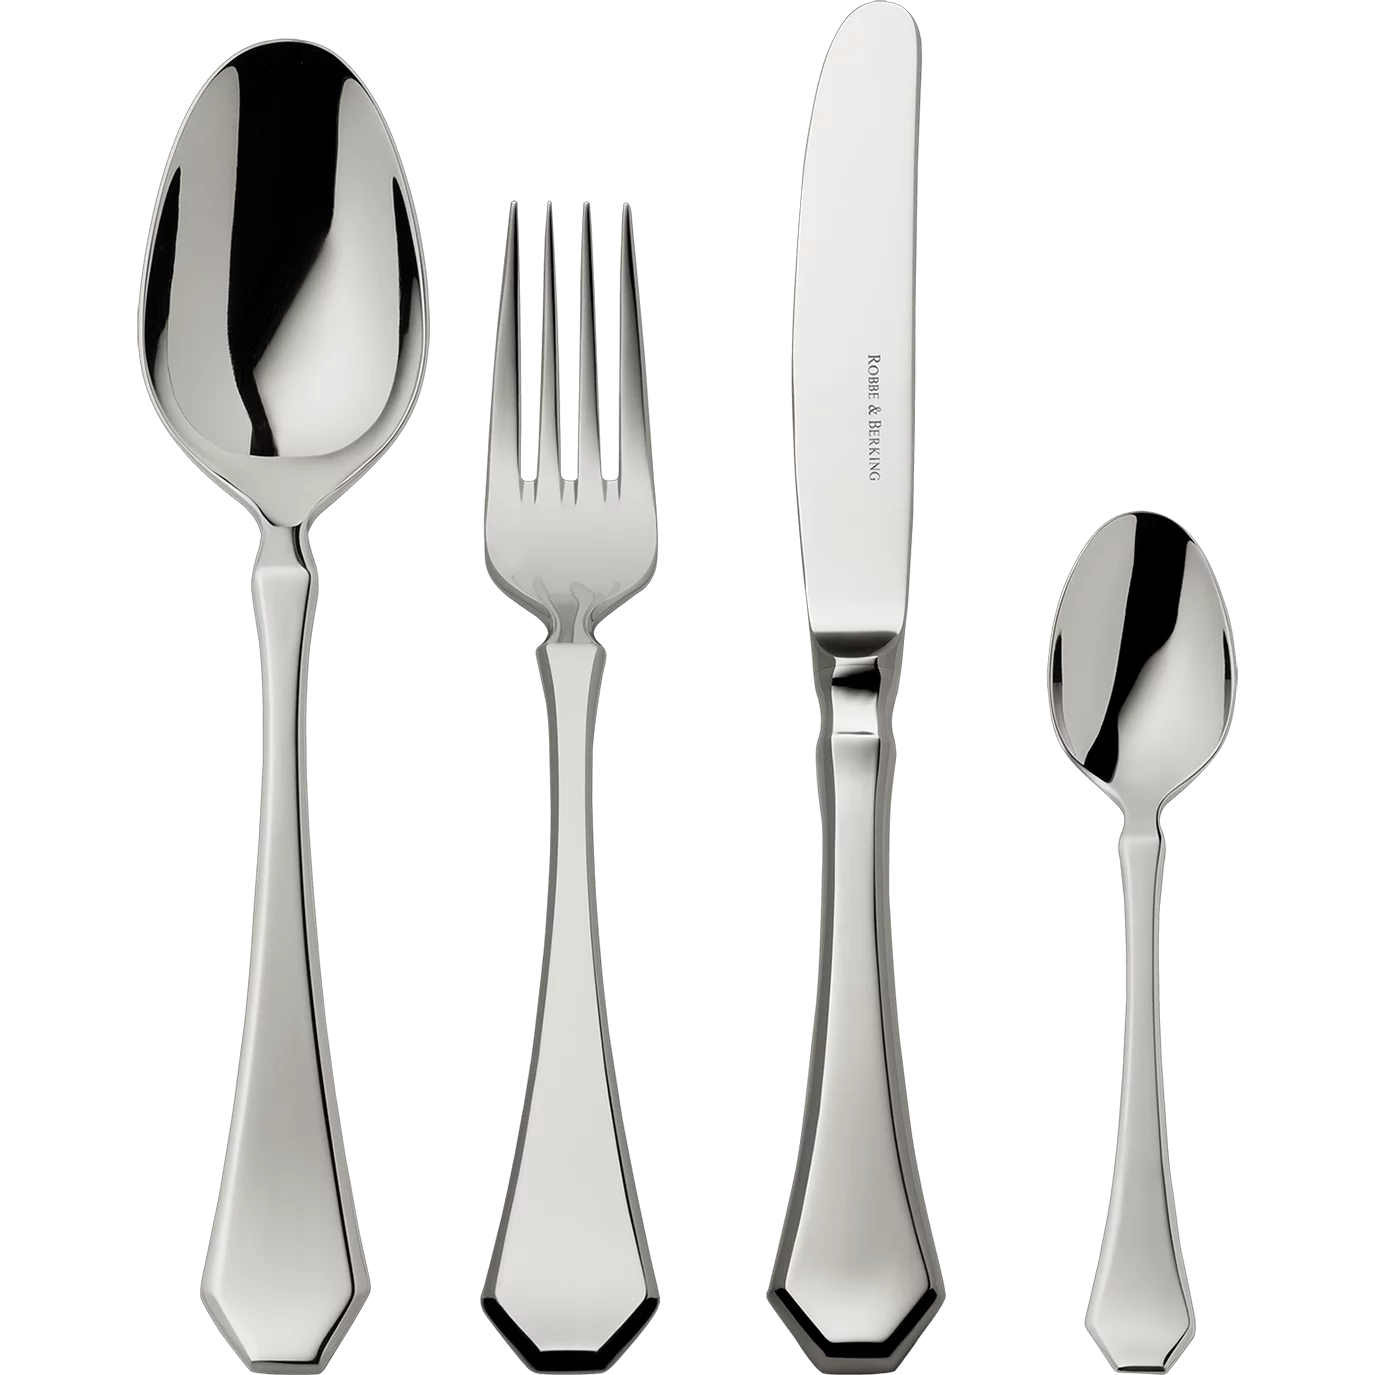 Baltic 24-piece set (18/8 stainless steel)